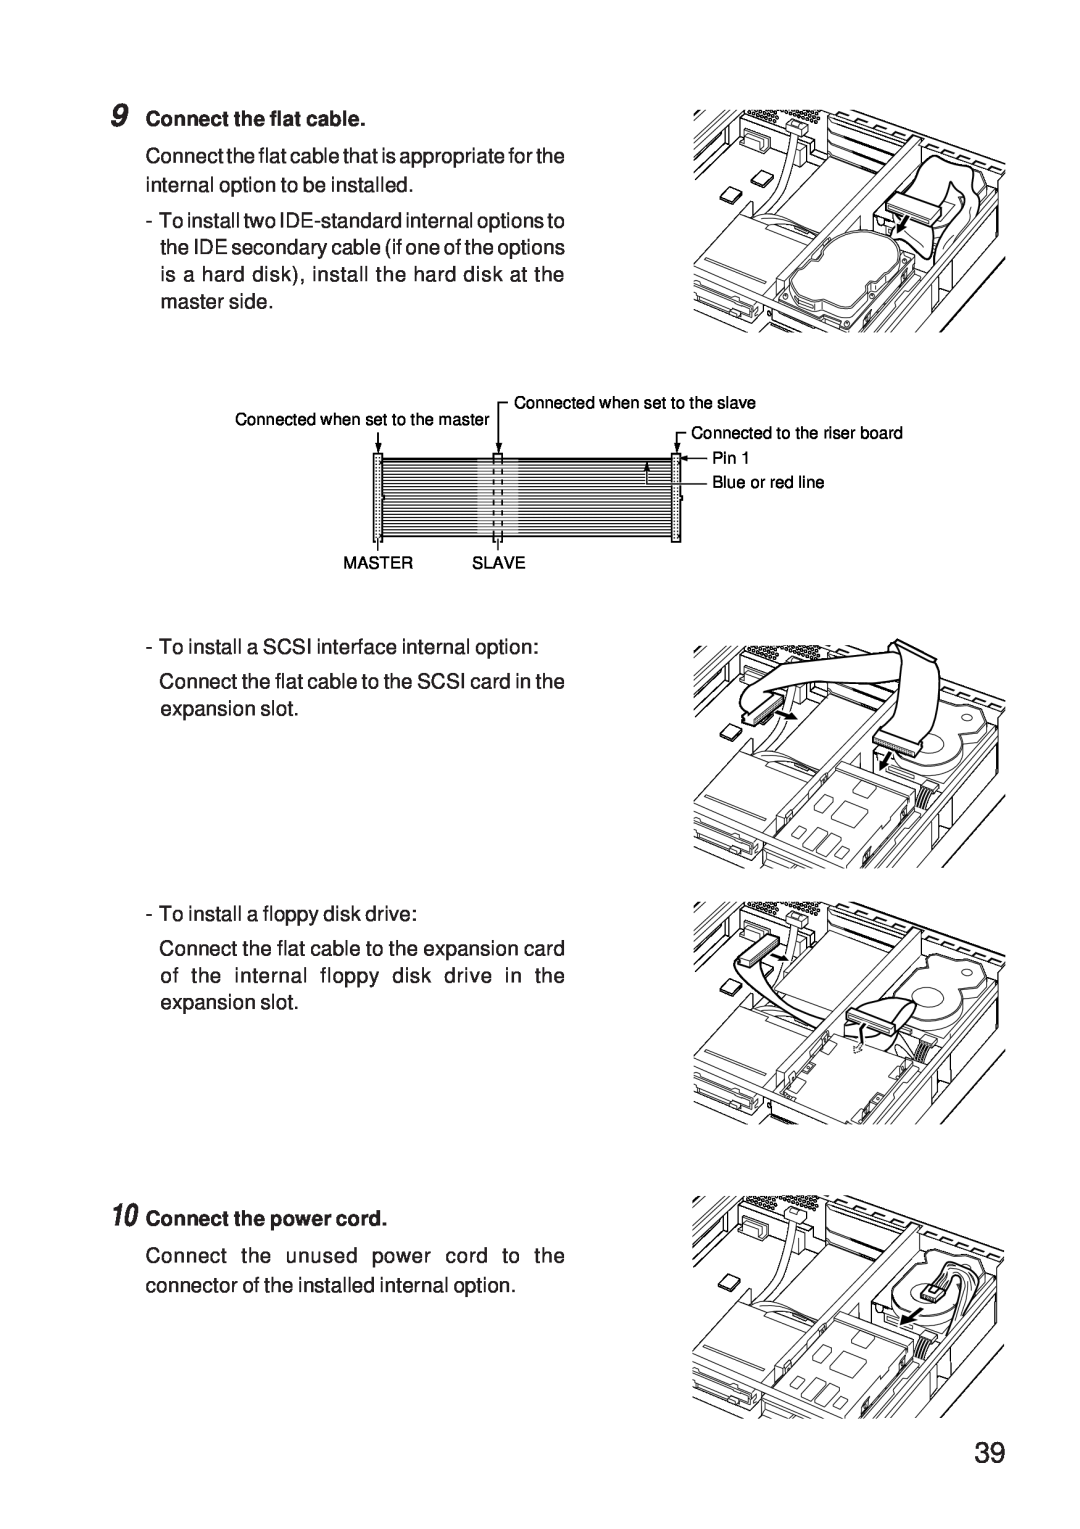 Fujitsu 5000 user manual Connect the flat cable, Connect the power cord 